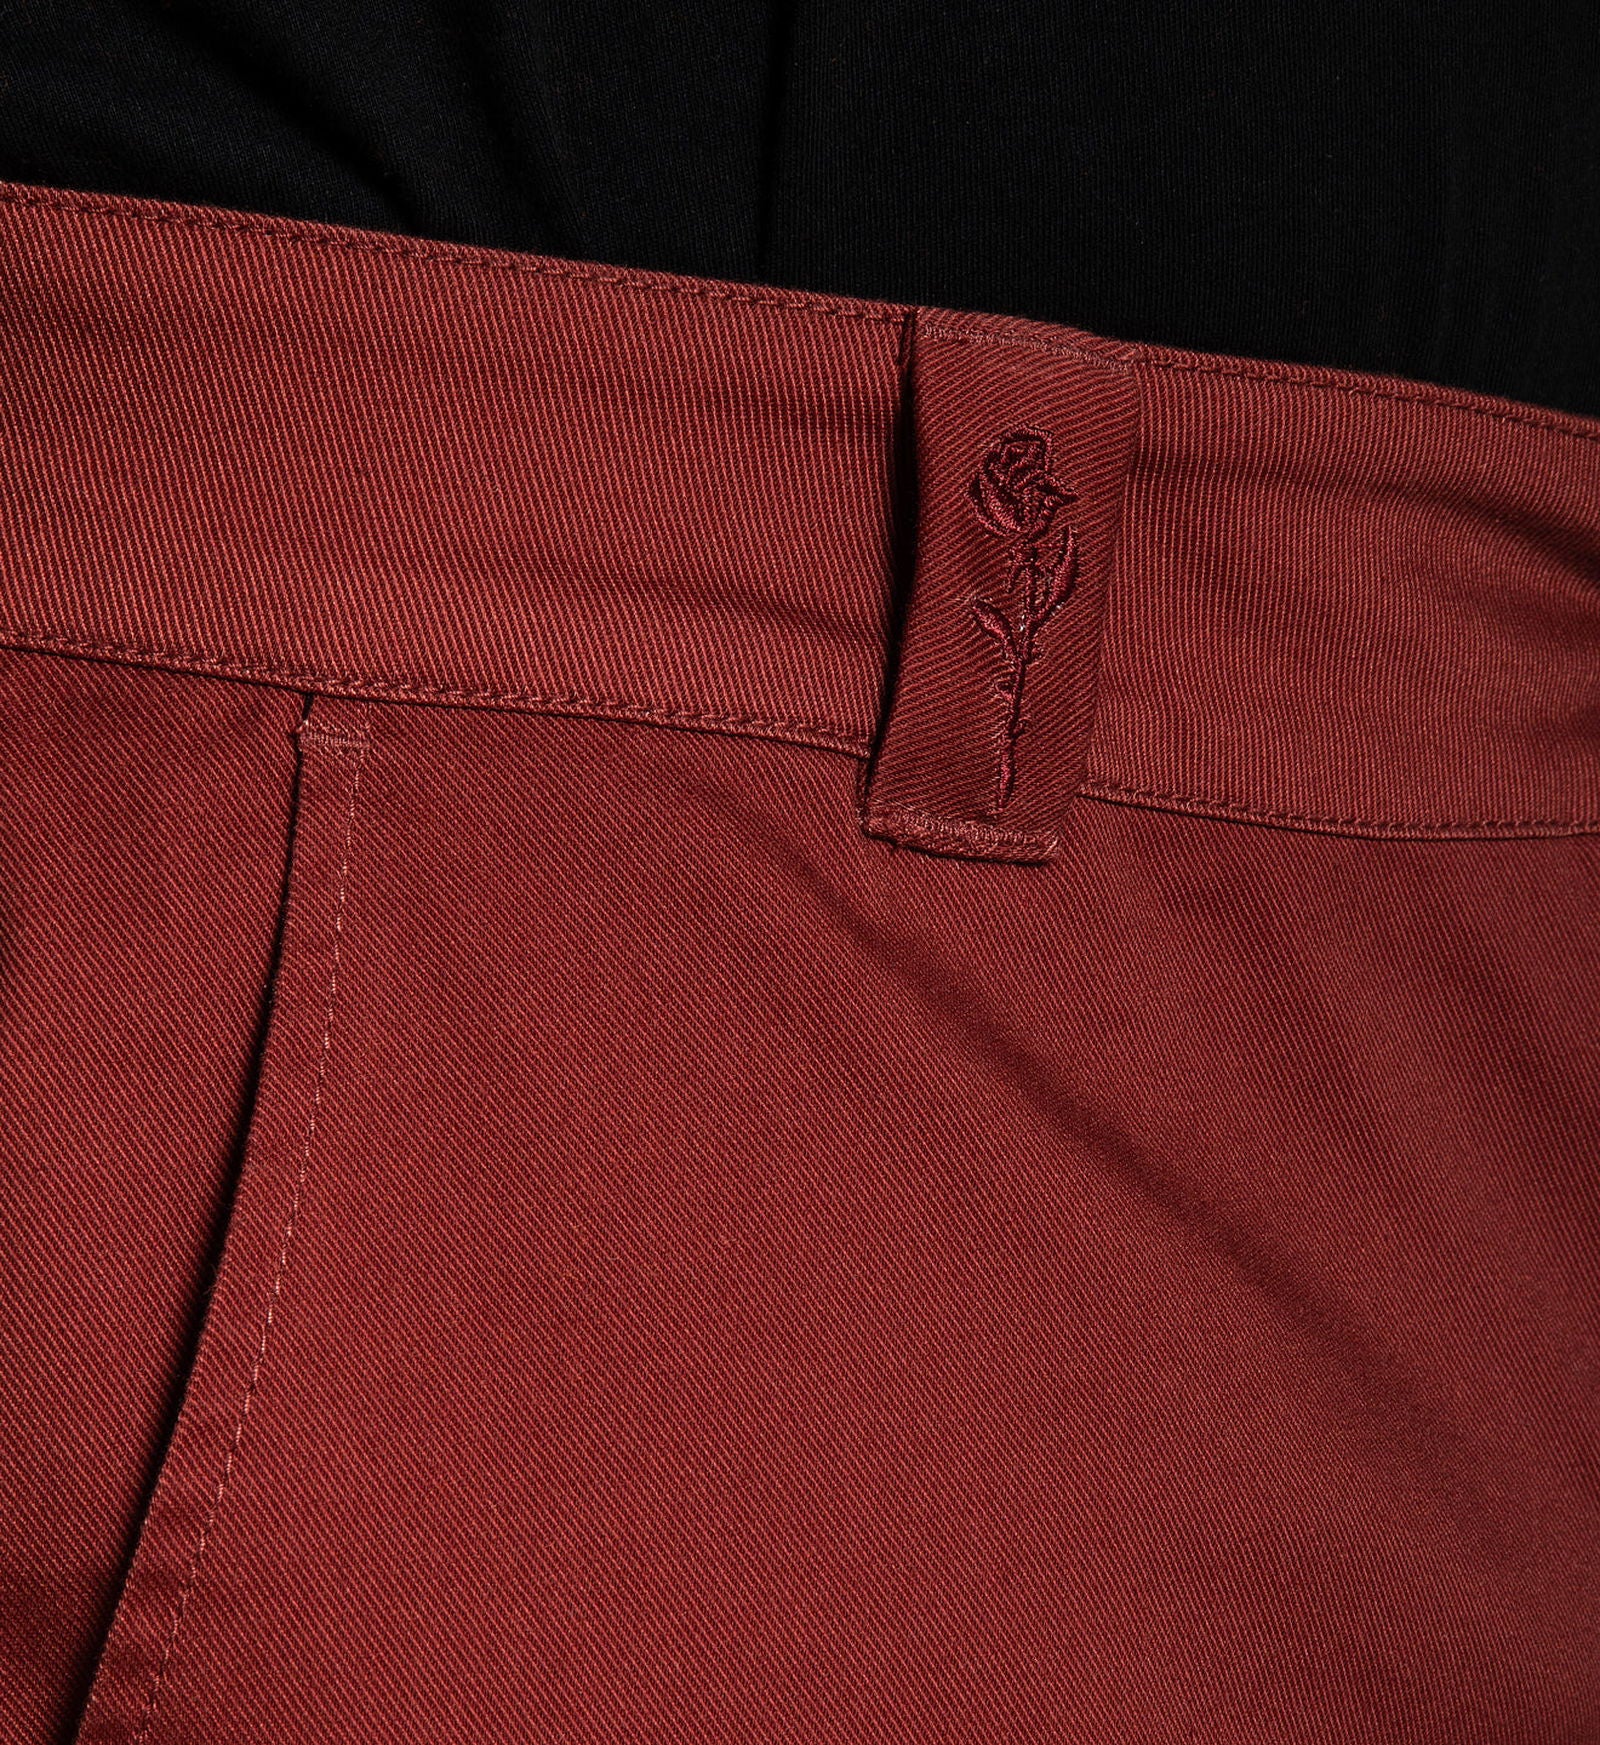 925 Relaxed fit Chino Stretch Pant Cherry Mahogany -                                     